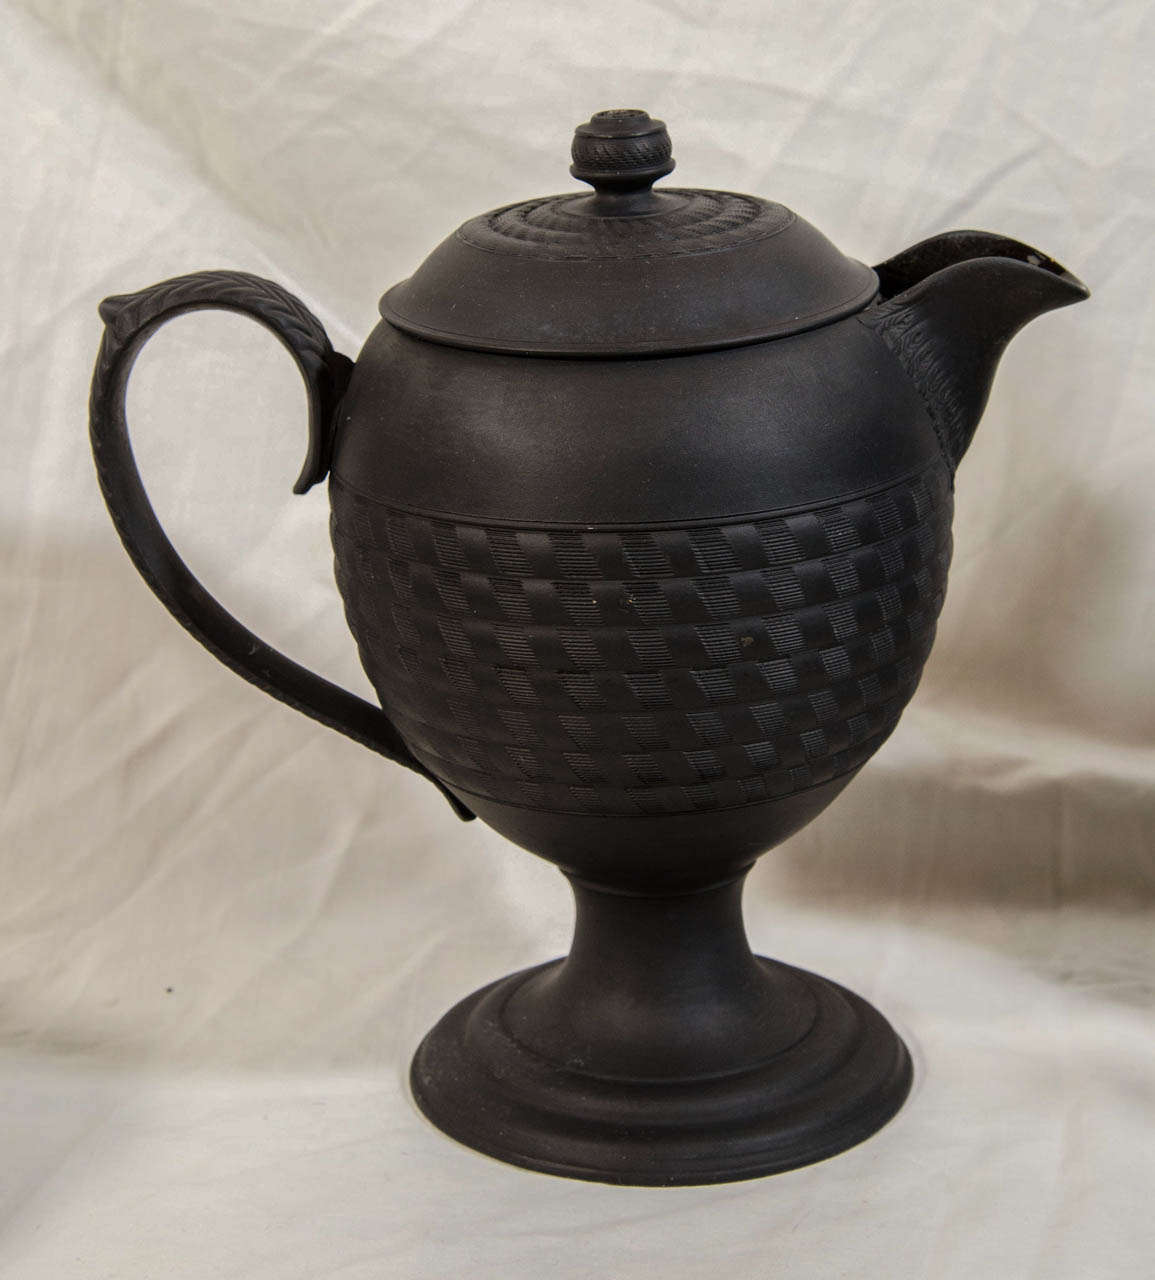 A group of early 19th century engine turned Black Basalt wares comprising a cylindrical teapot and cover modeled with classical figures, and three coffee pots with machine turned architectural details. Black basalt was introduced by Josiah Wedgwood